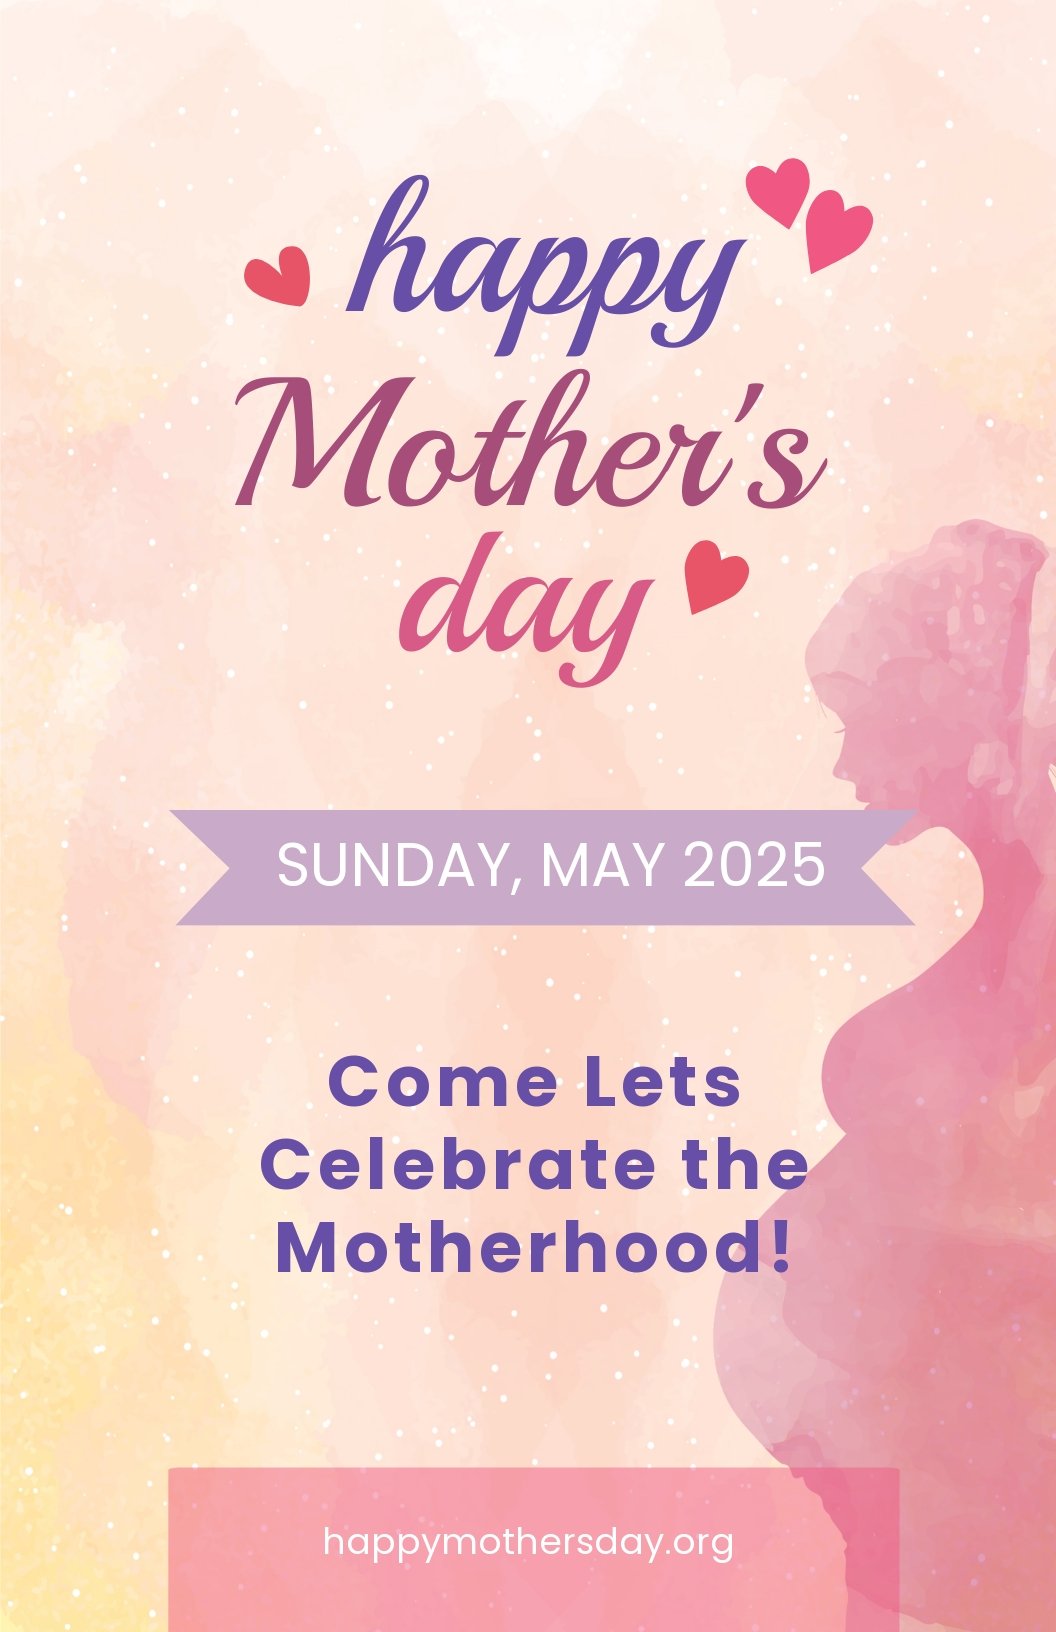 43-free-mothers-day-templates-ideas-designs-2021-template